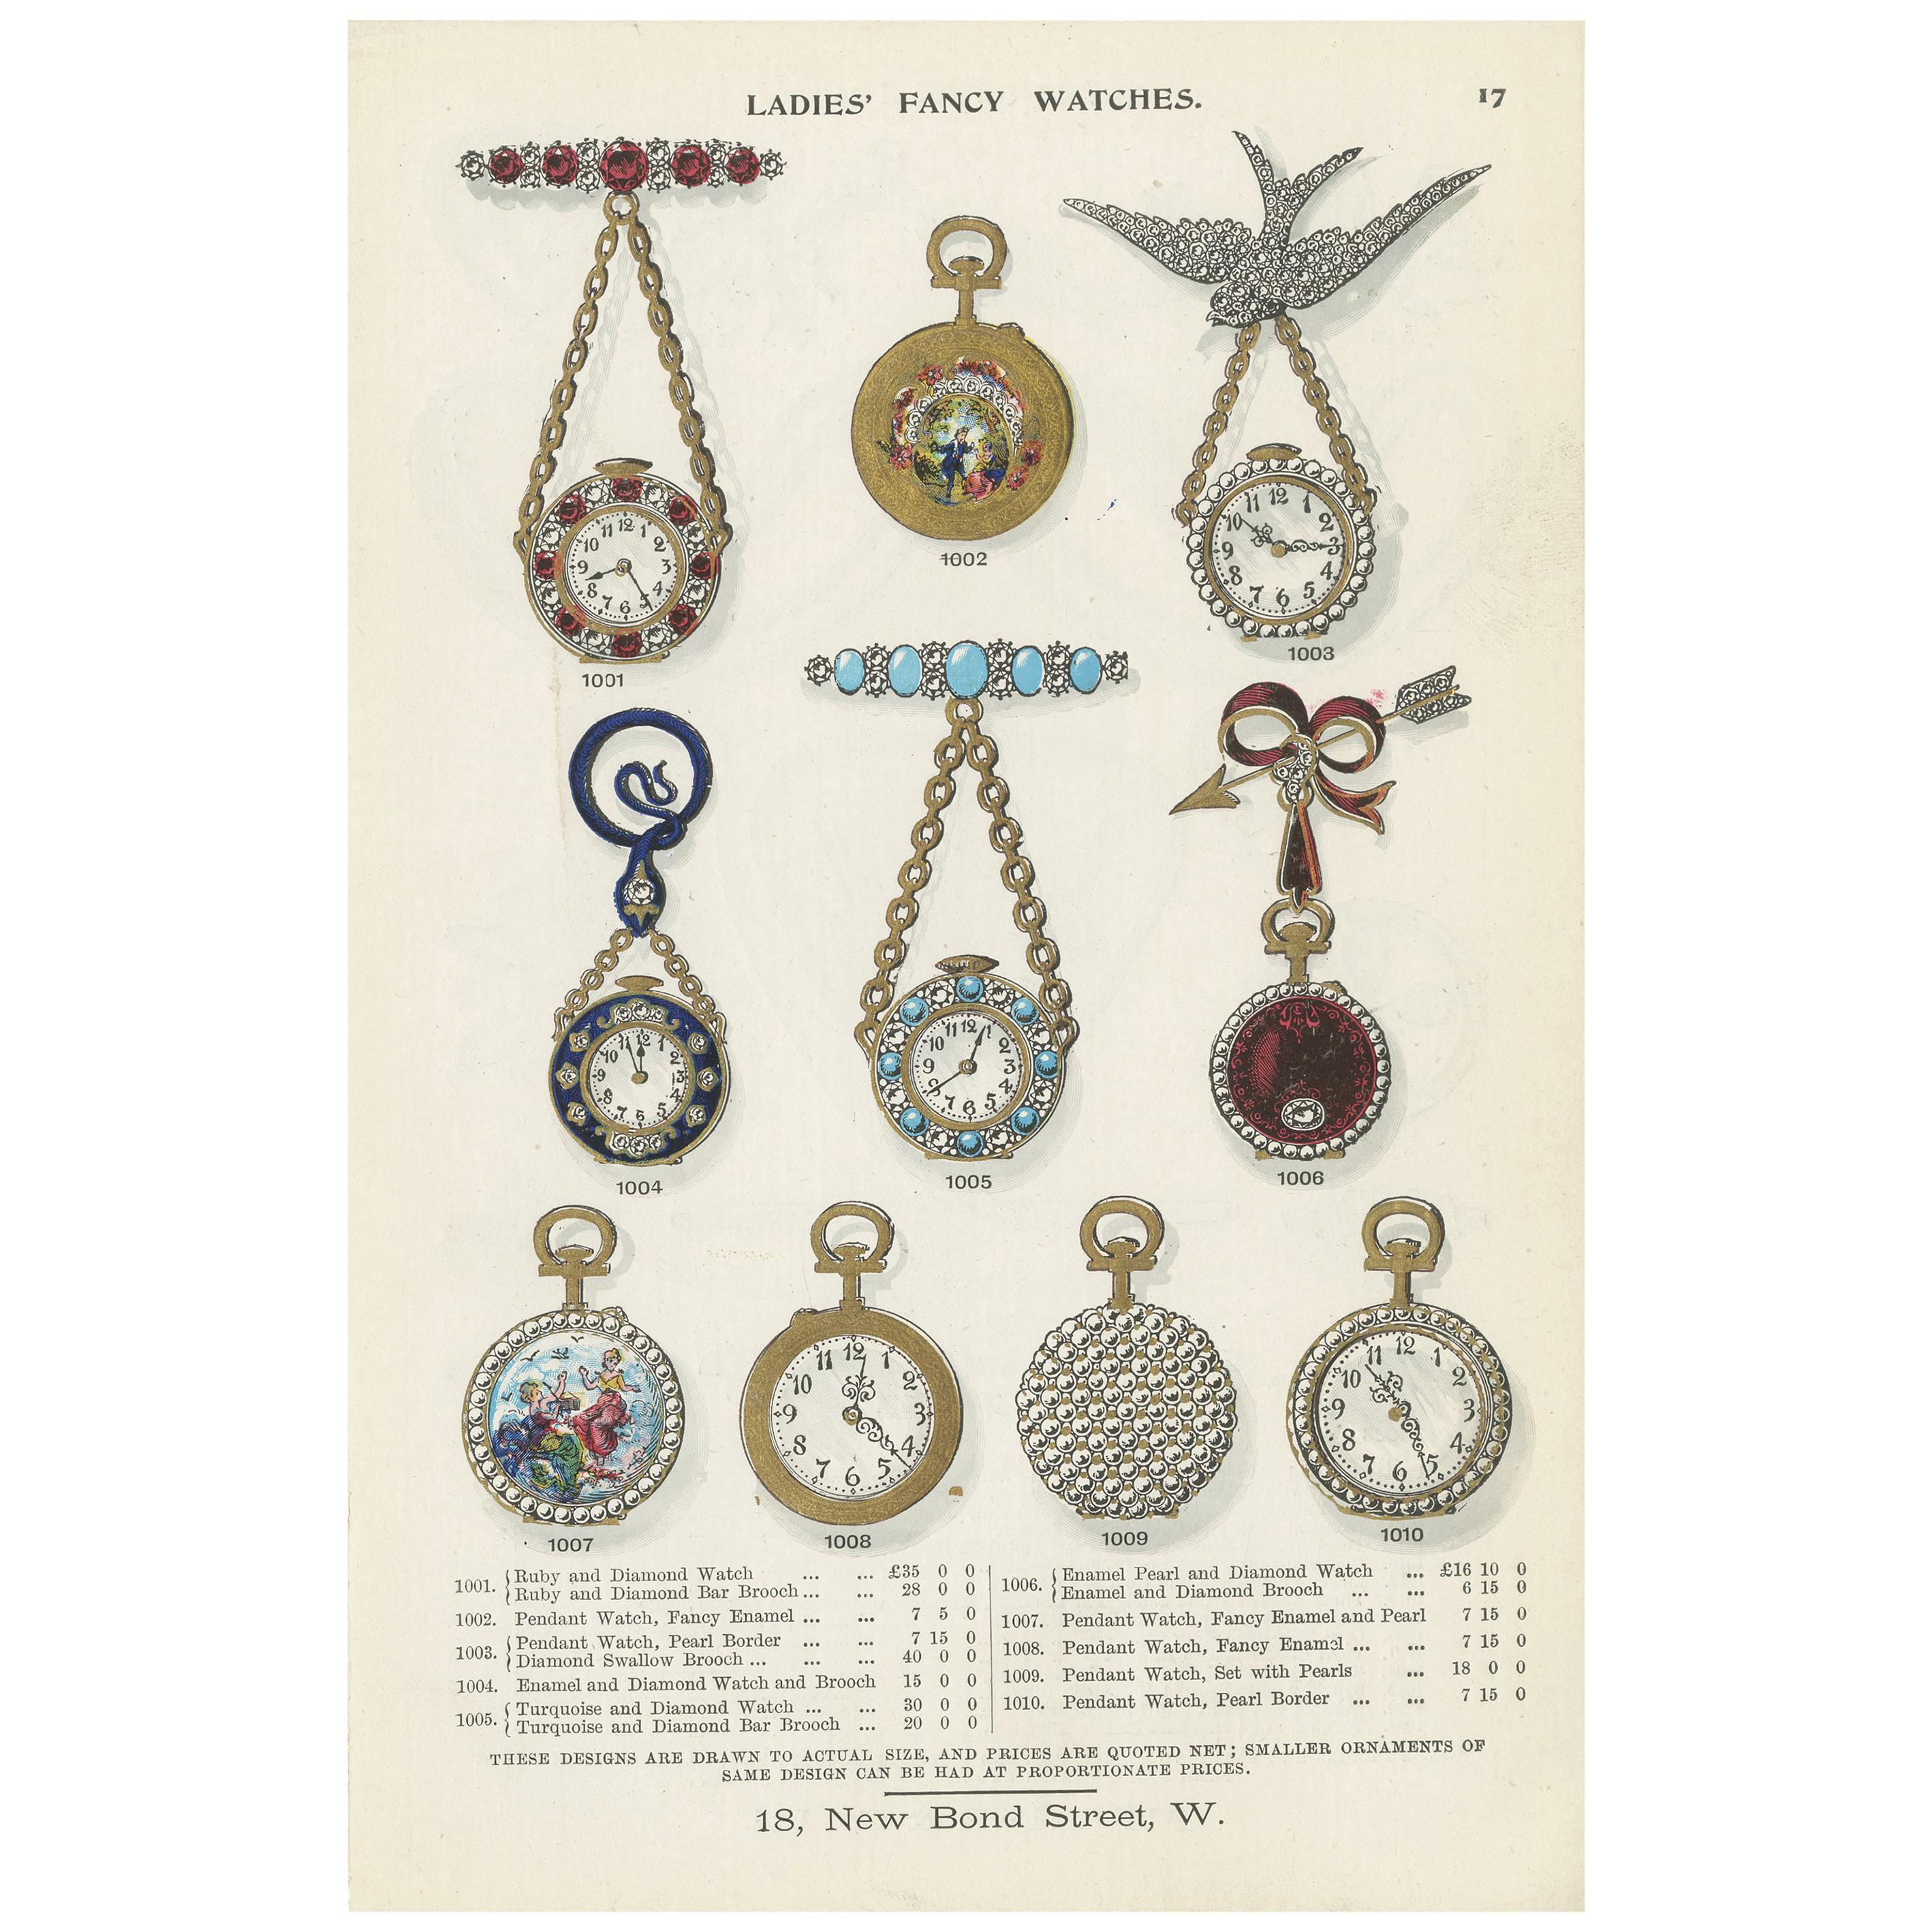 Antique Print of Ladies' Fancy Watches by Streeter, 1898